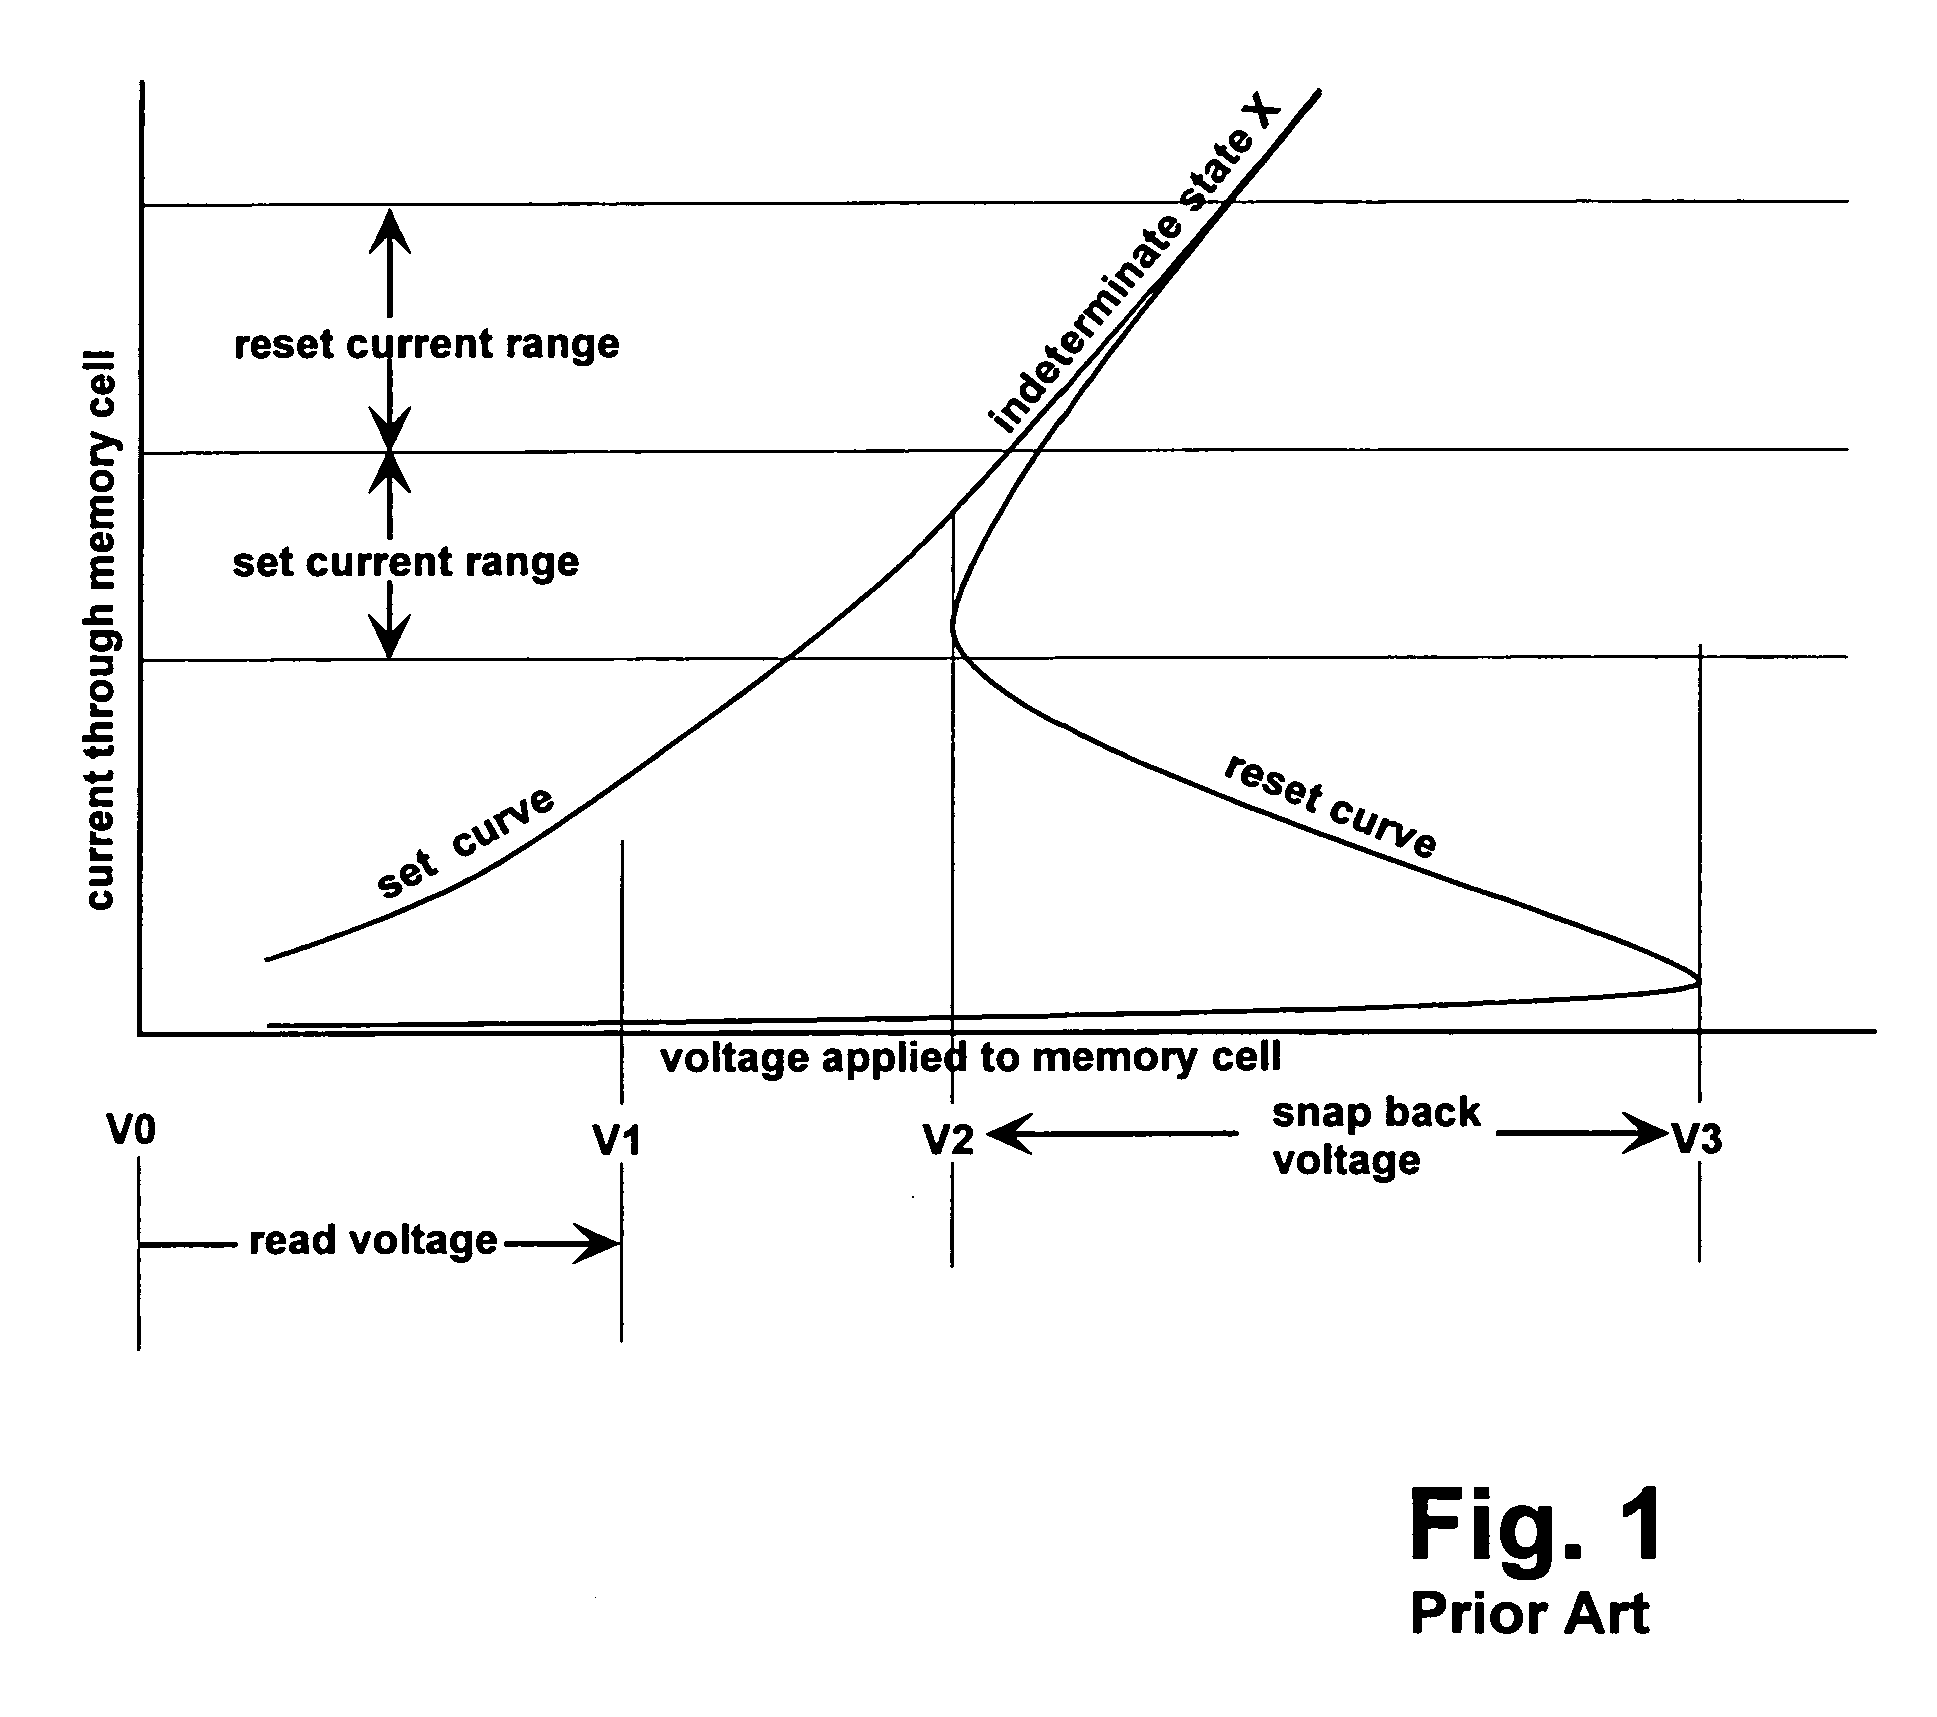 Structure and method for biasing phase change memory array for reliable writing